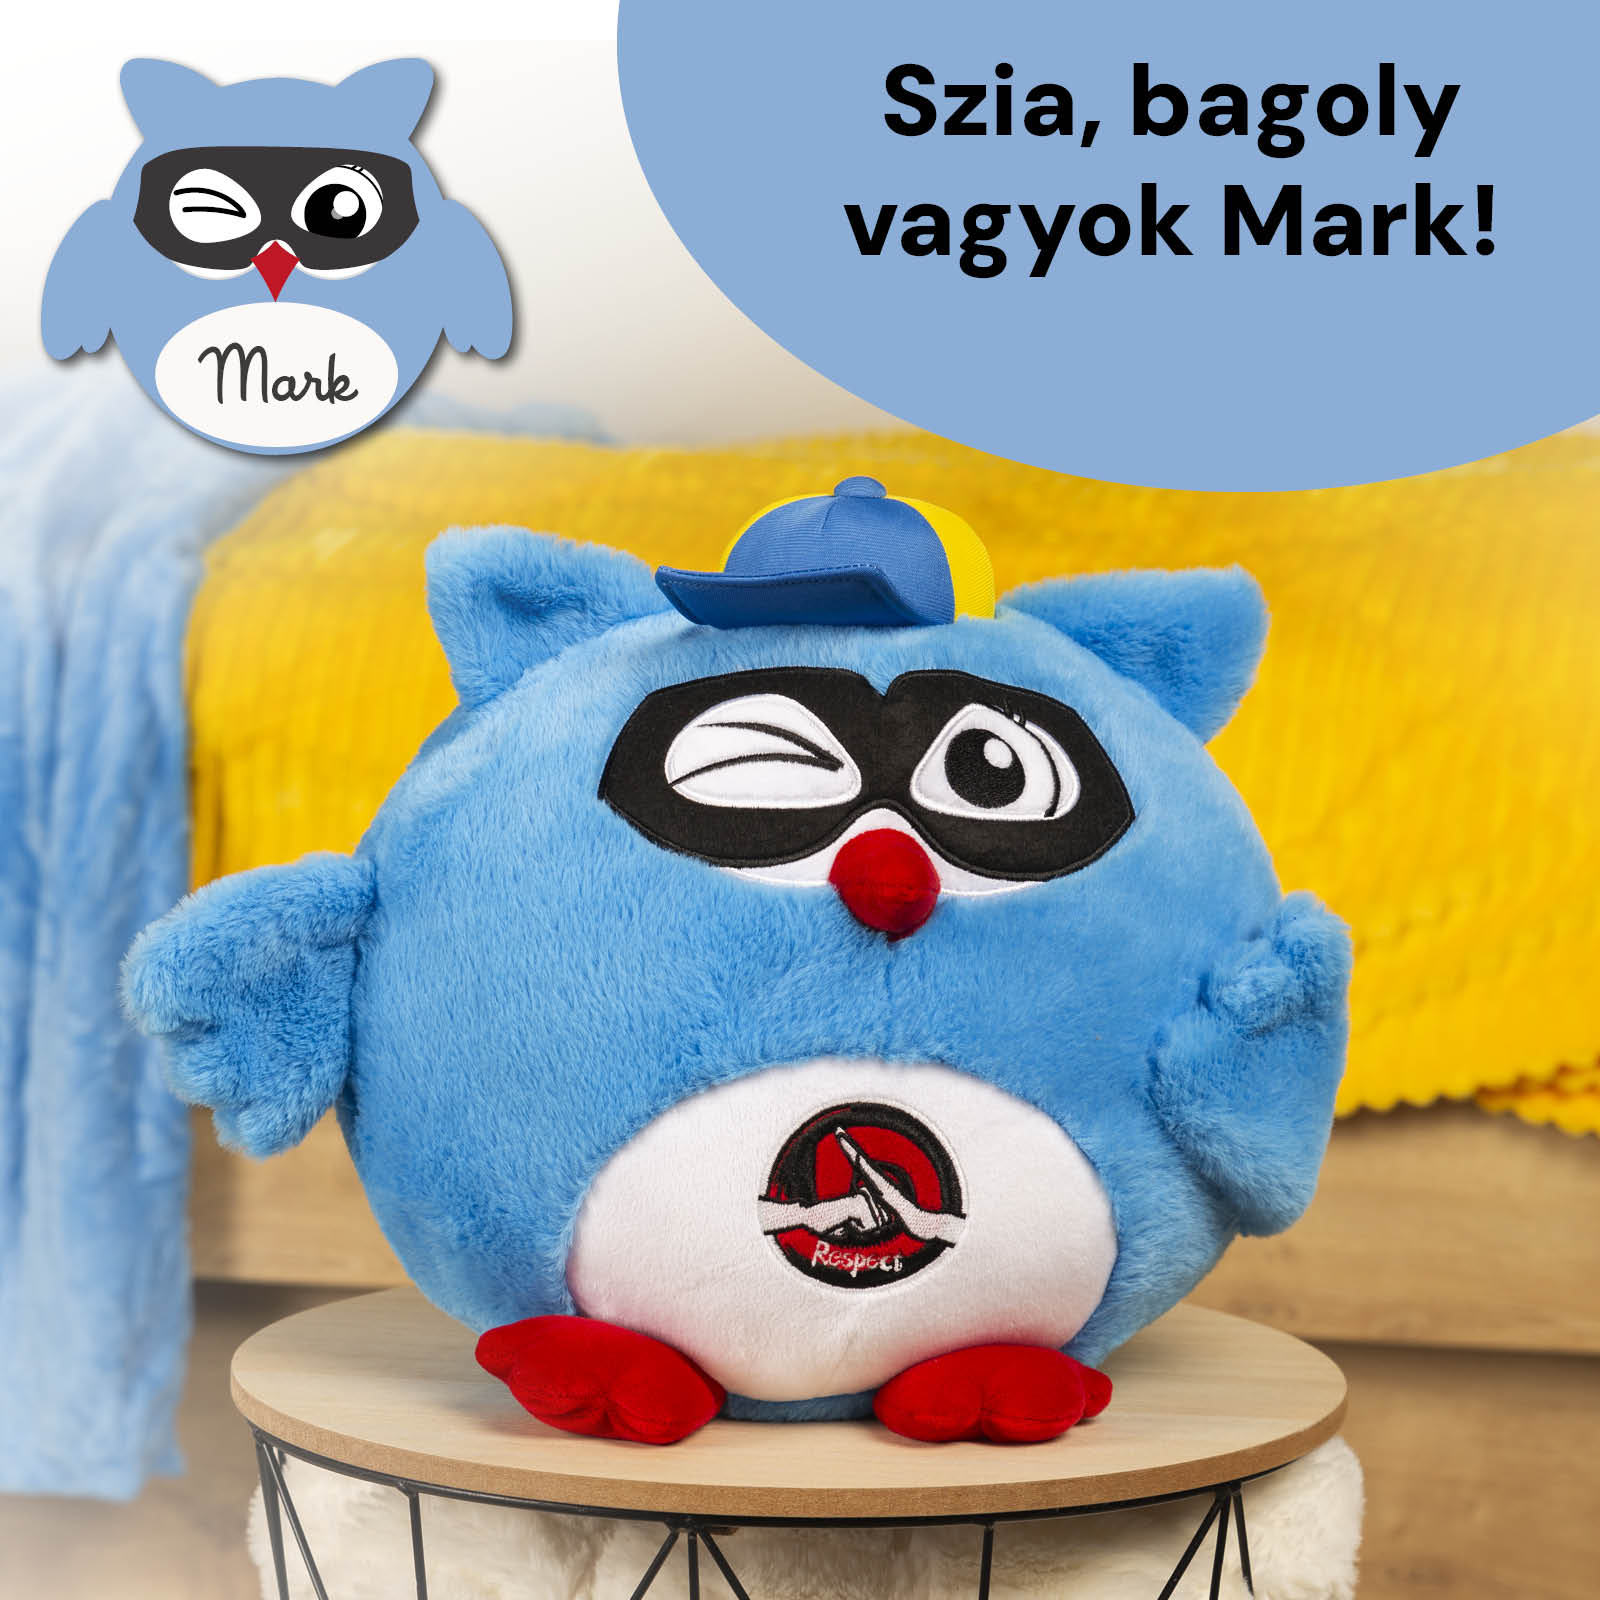 Bagoly Mark fiú - 3in1